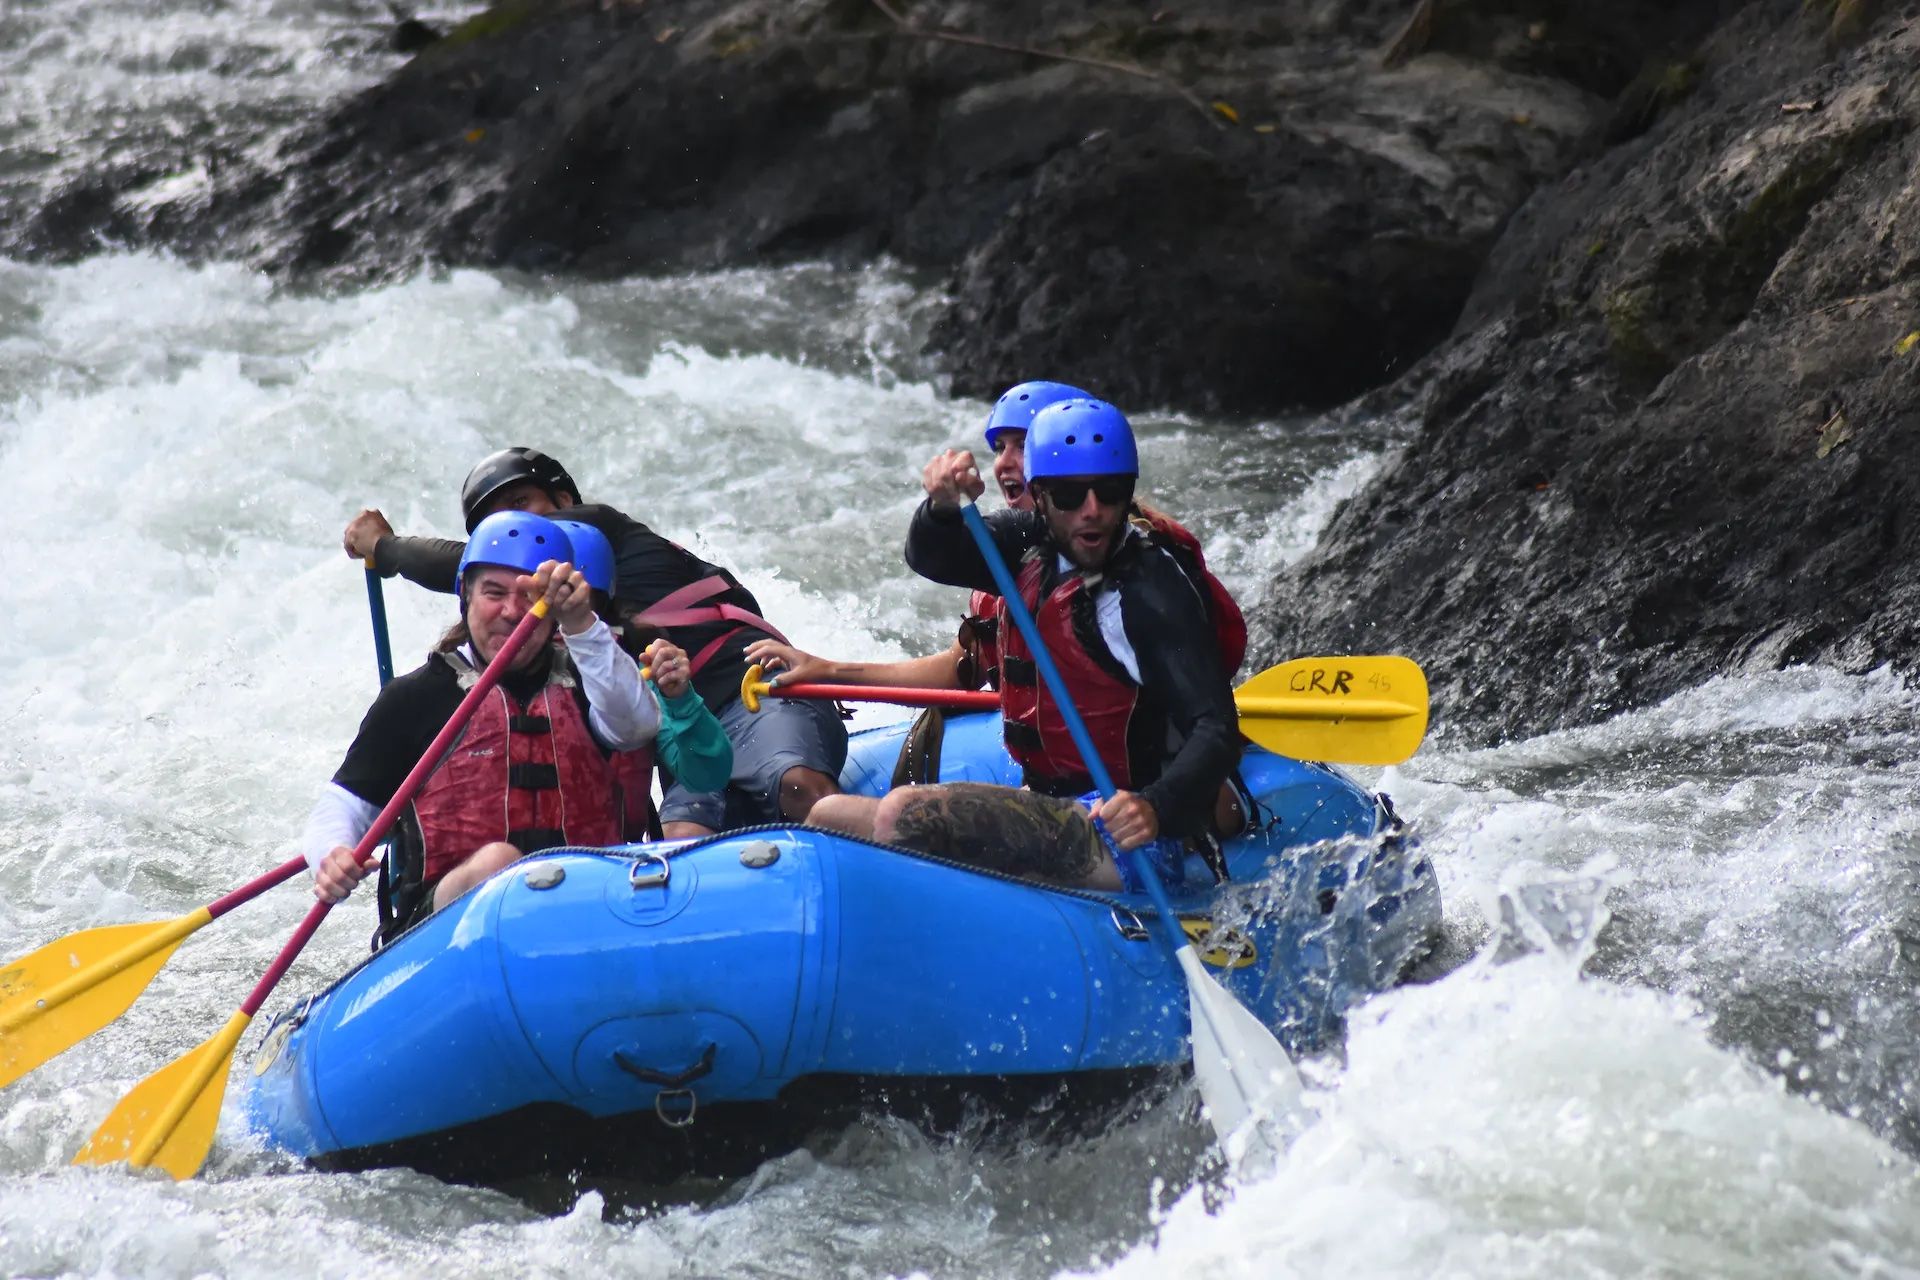 A rafting group navigate rapids on the Pacuare River, Costa Rica.